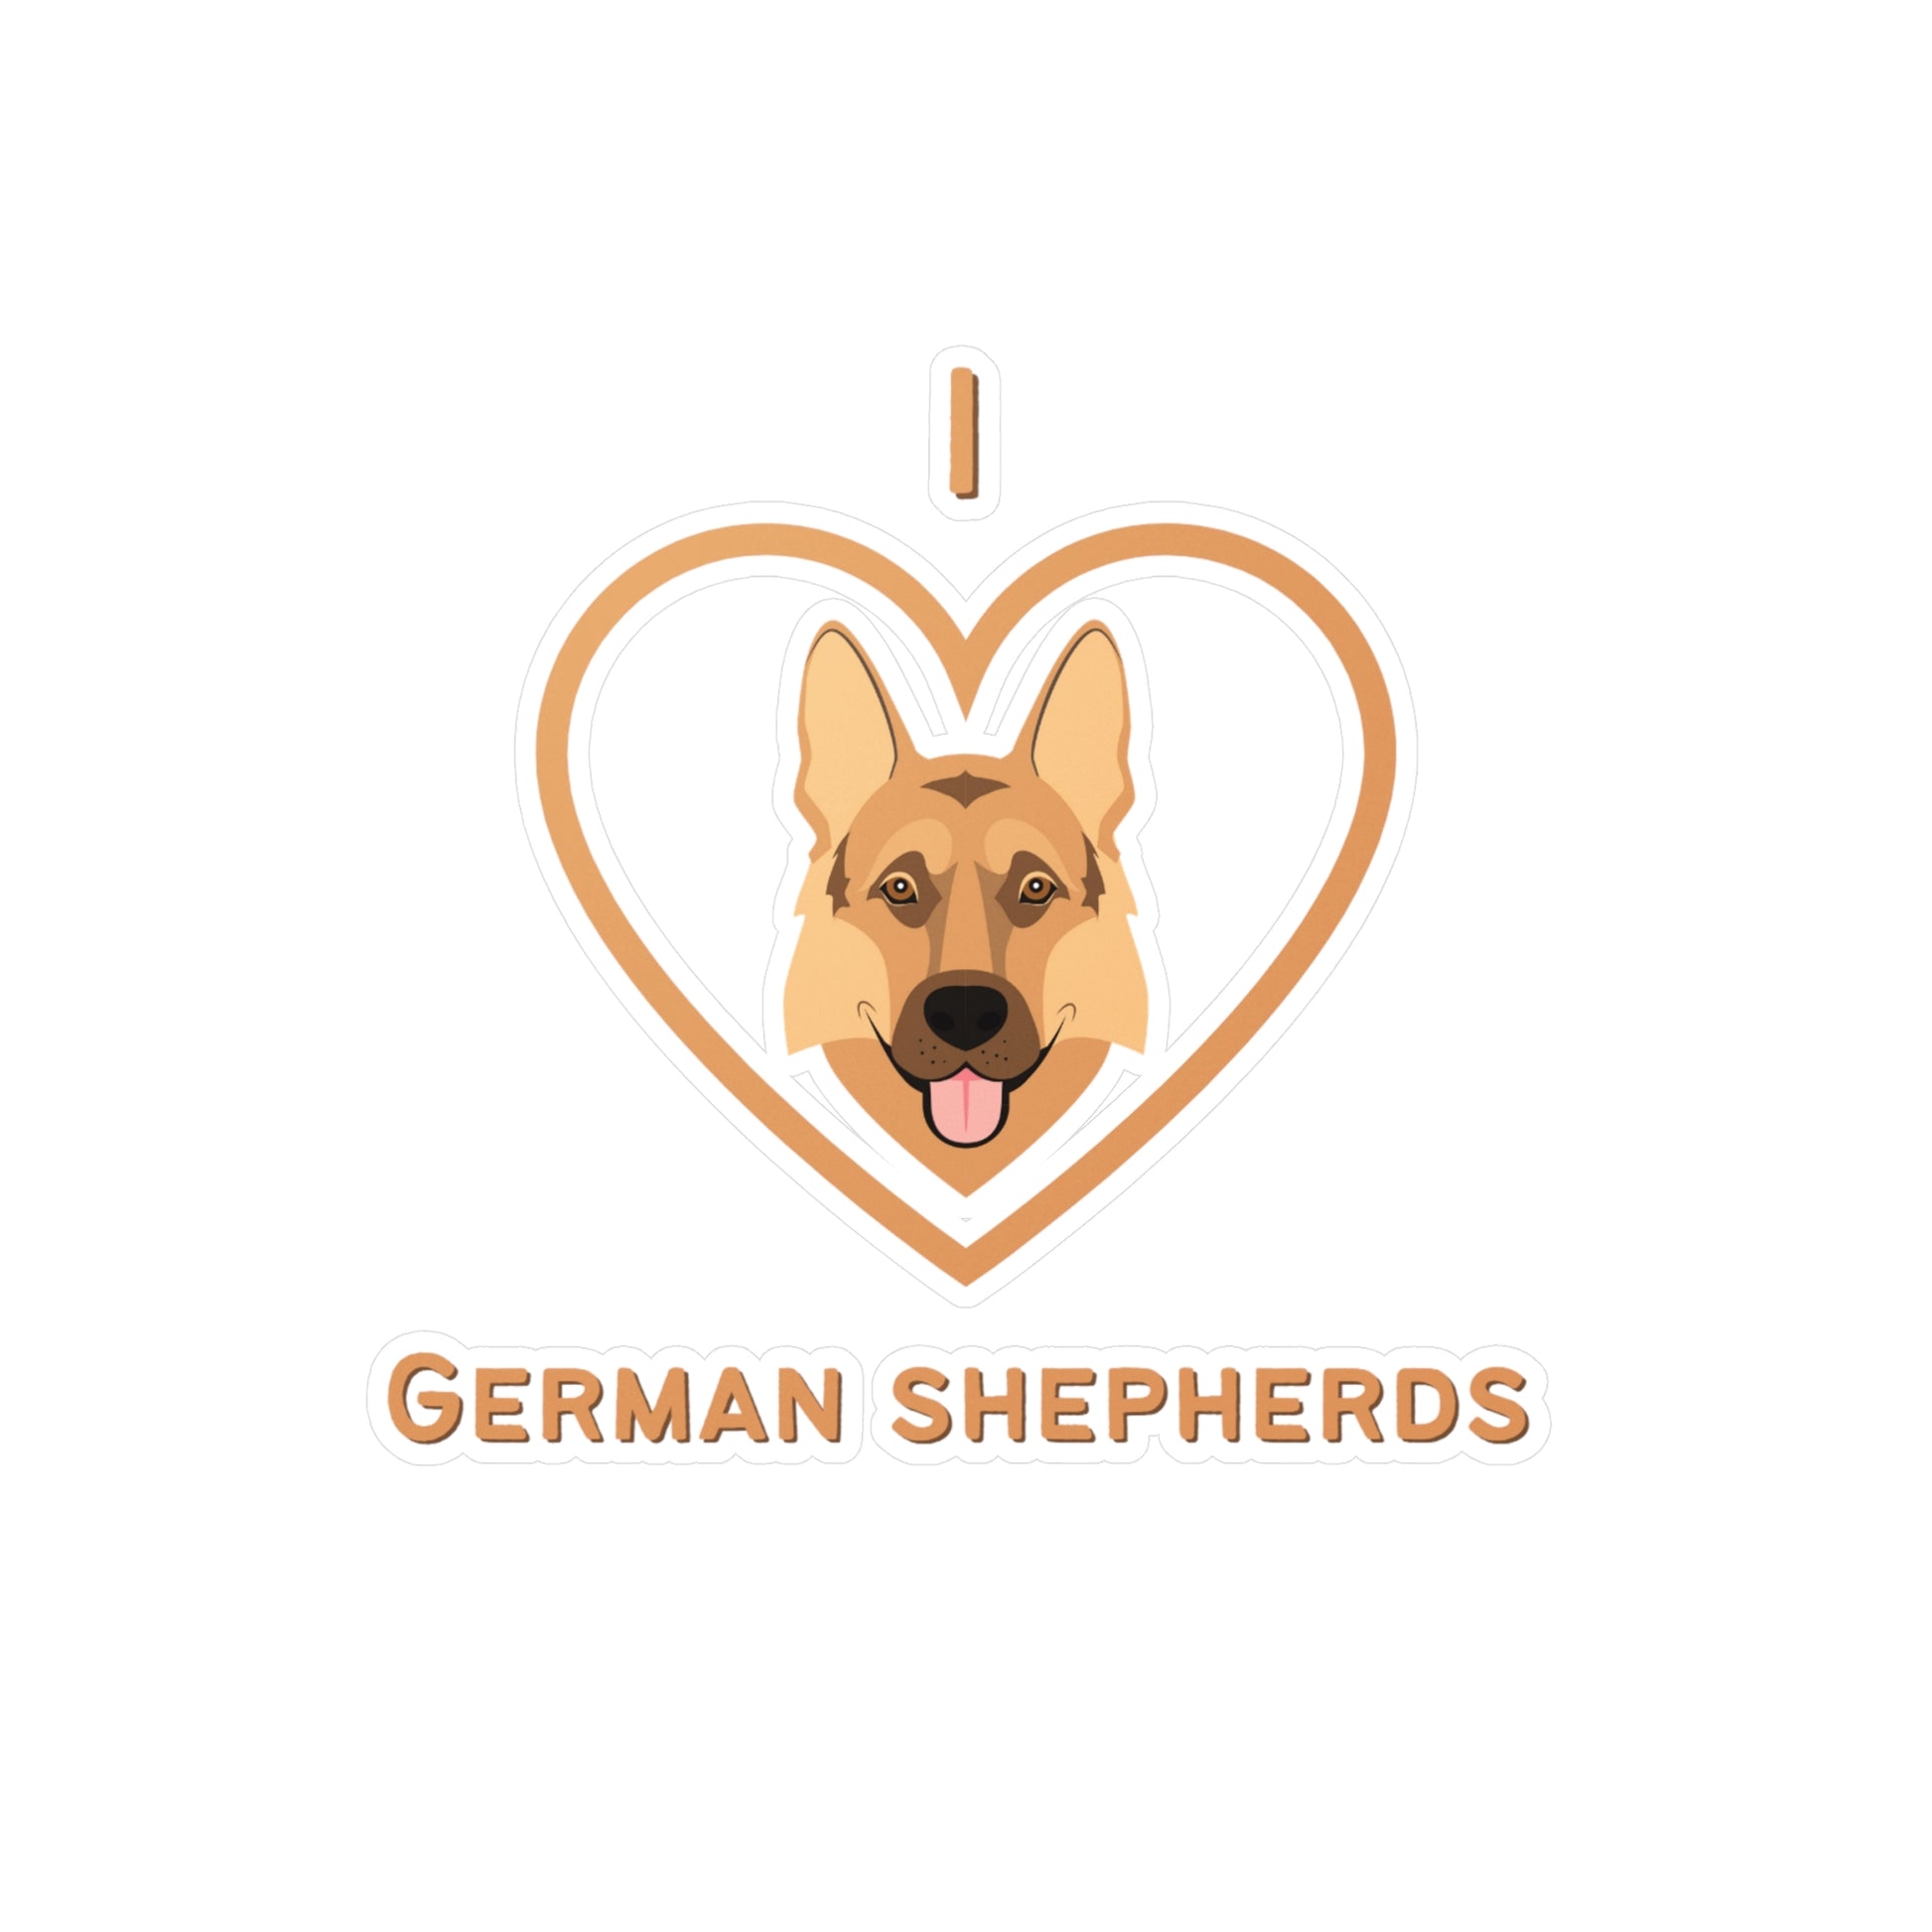 "I Love German Shepherds" Vinyl Decals - Weave Got Gifts - Unique Gifts You Won’t Find Anywhere Else!